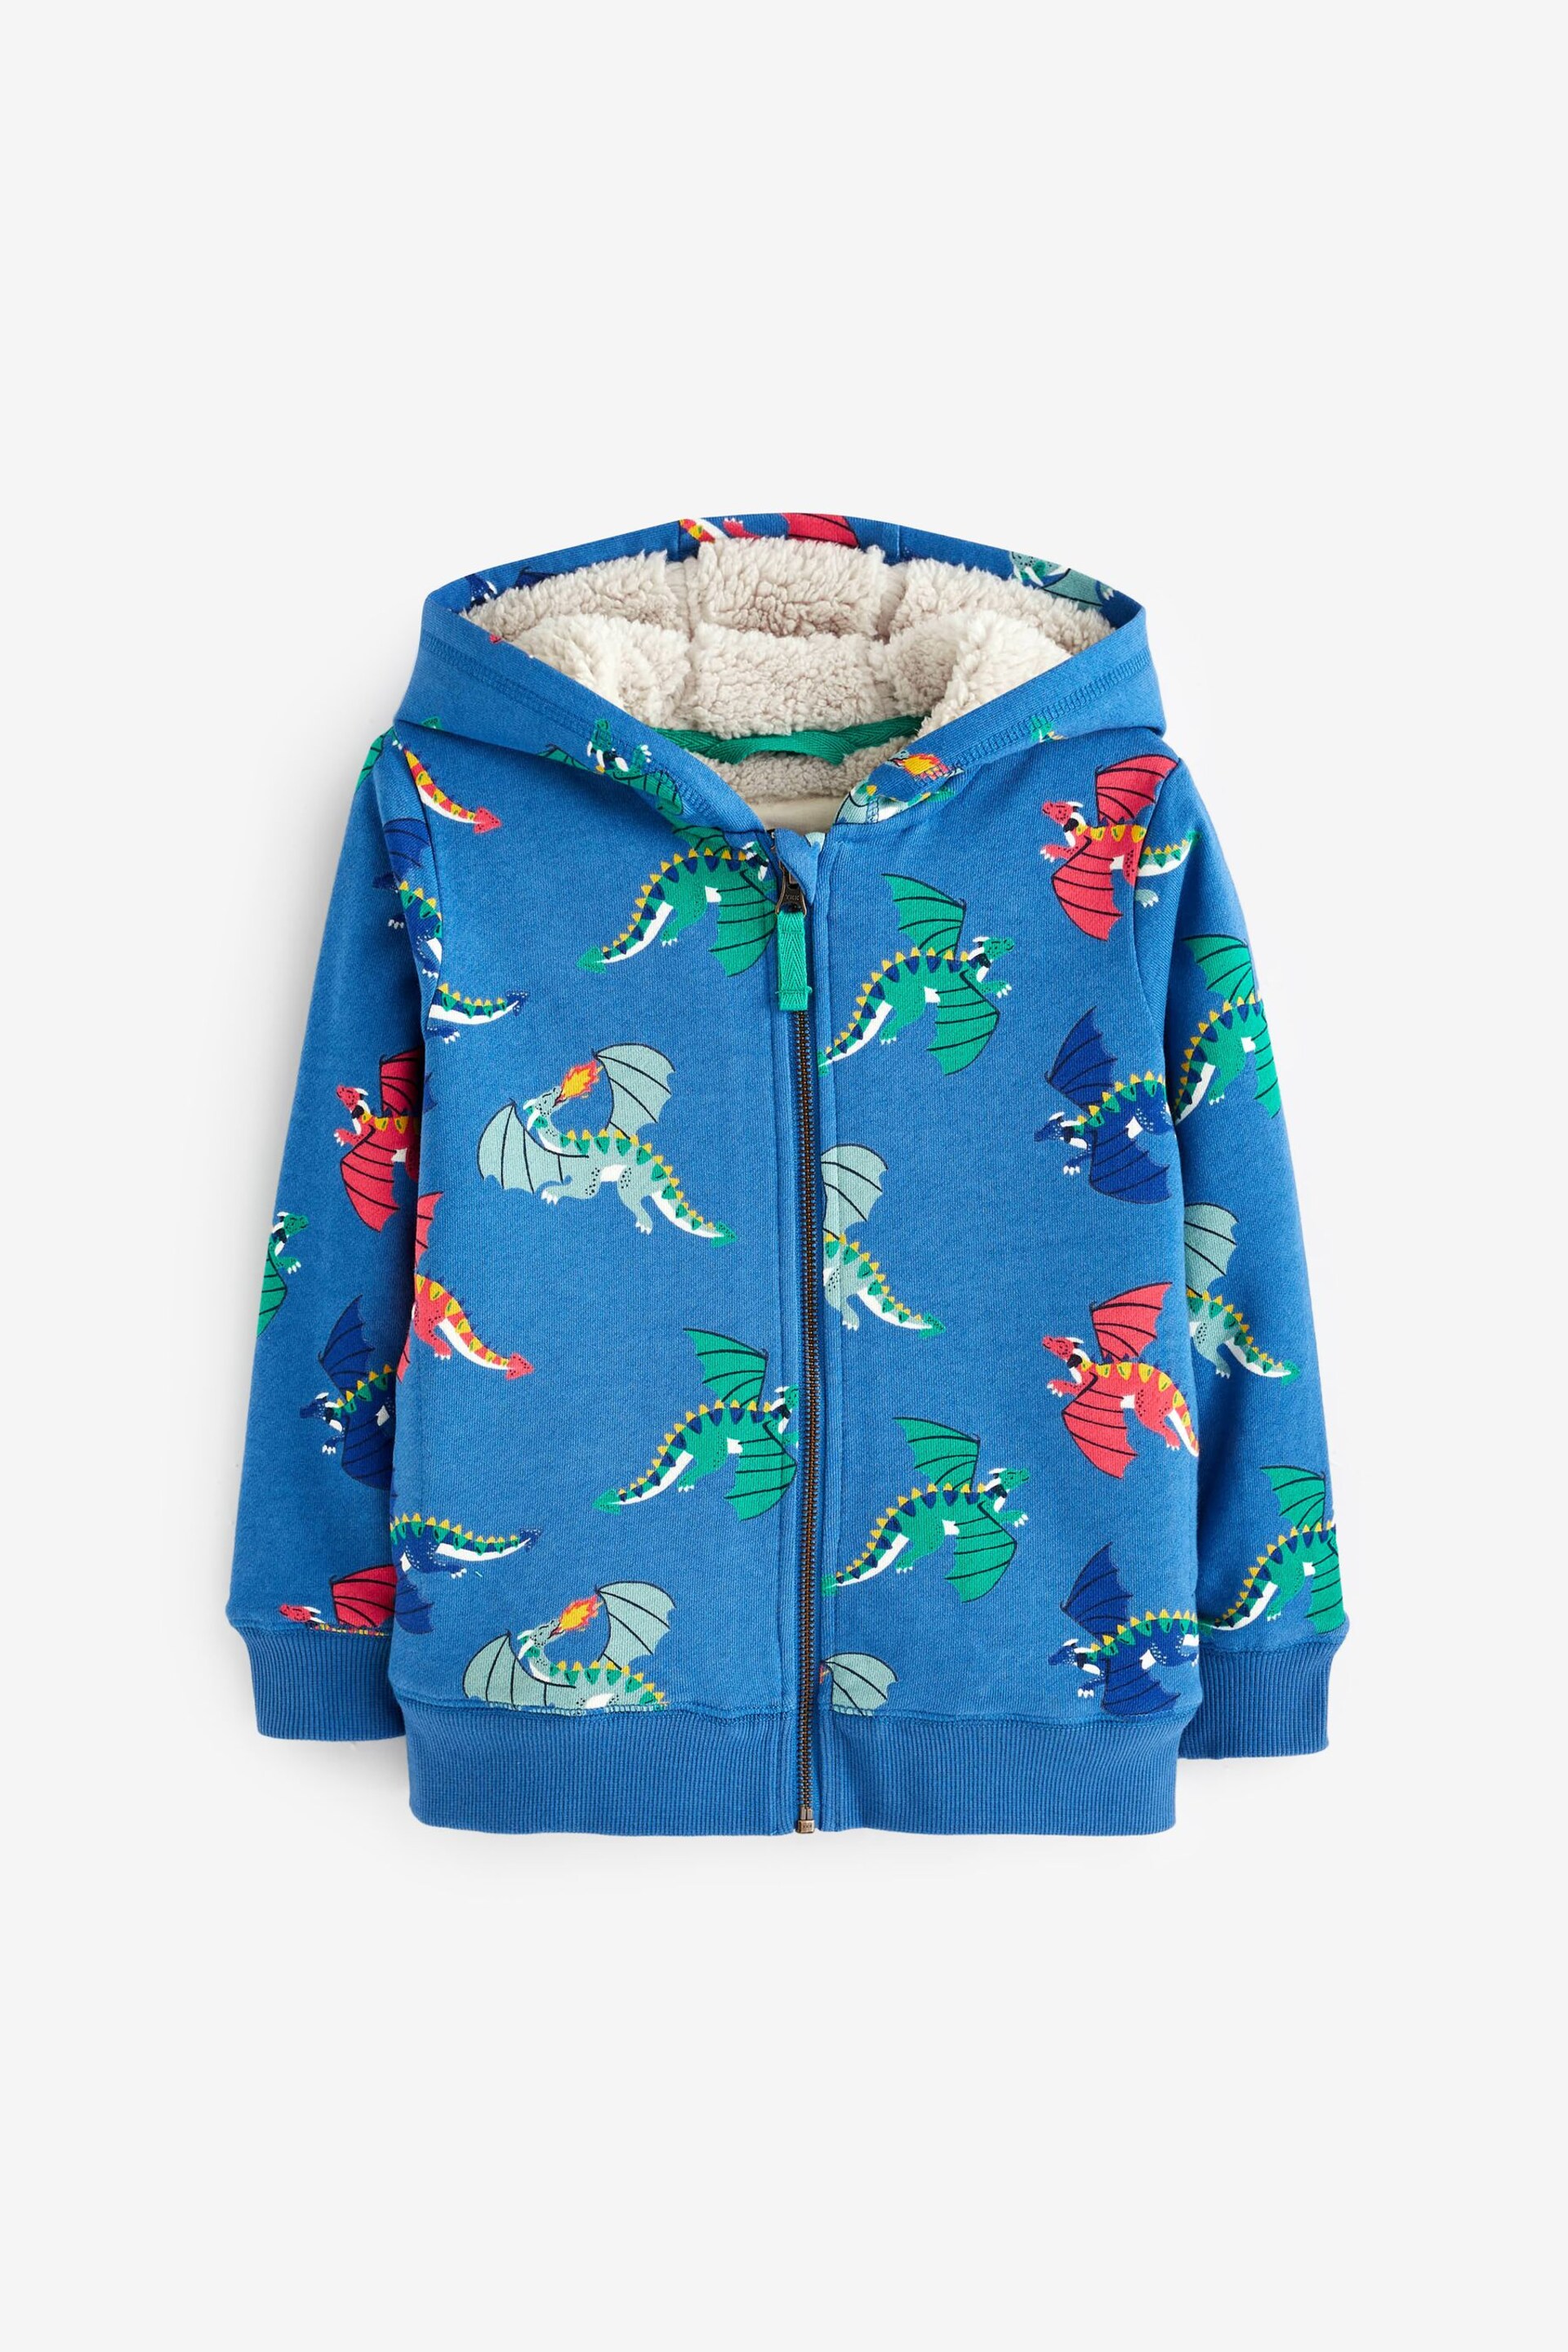 Boden Blue Shaggy-Lined Dragon Printed Hoodie - Image 1 of 4